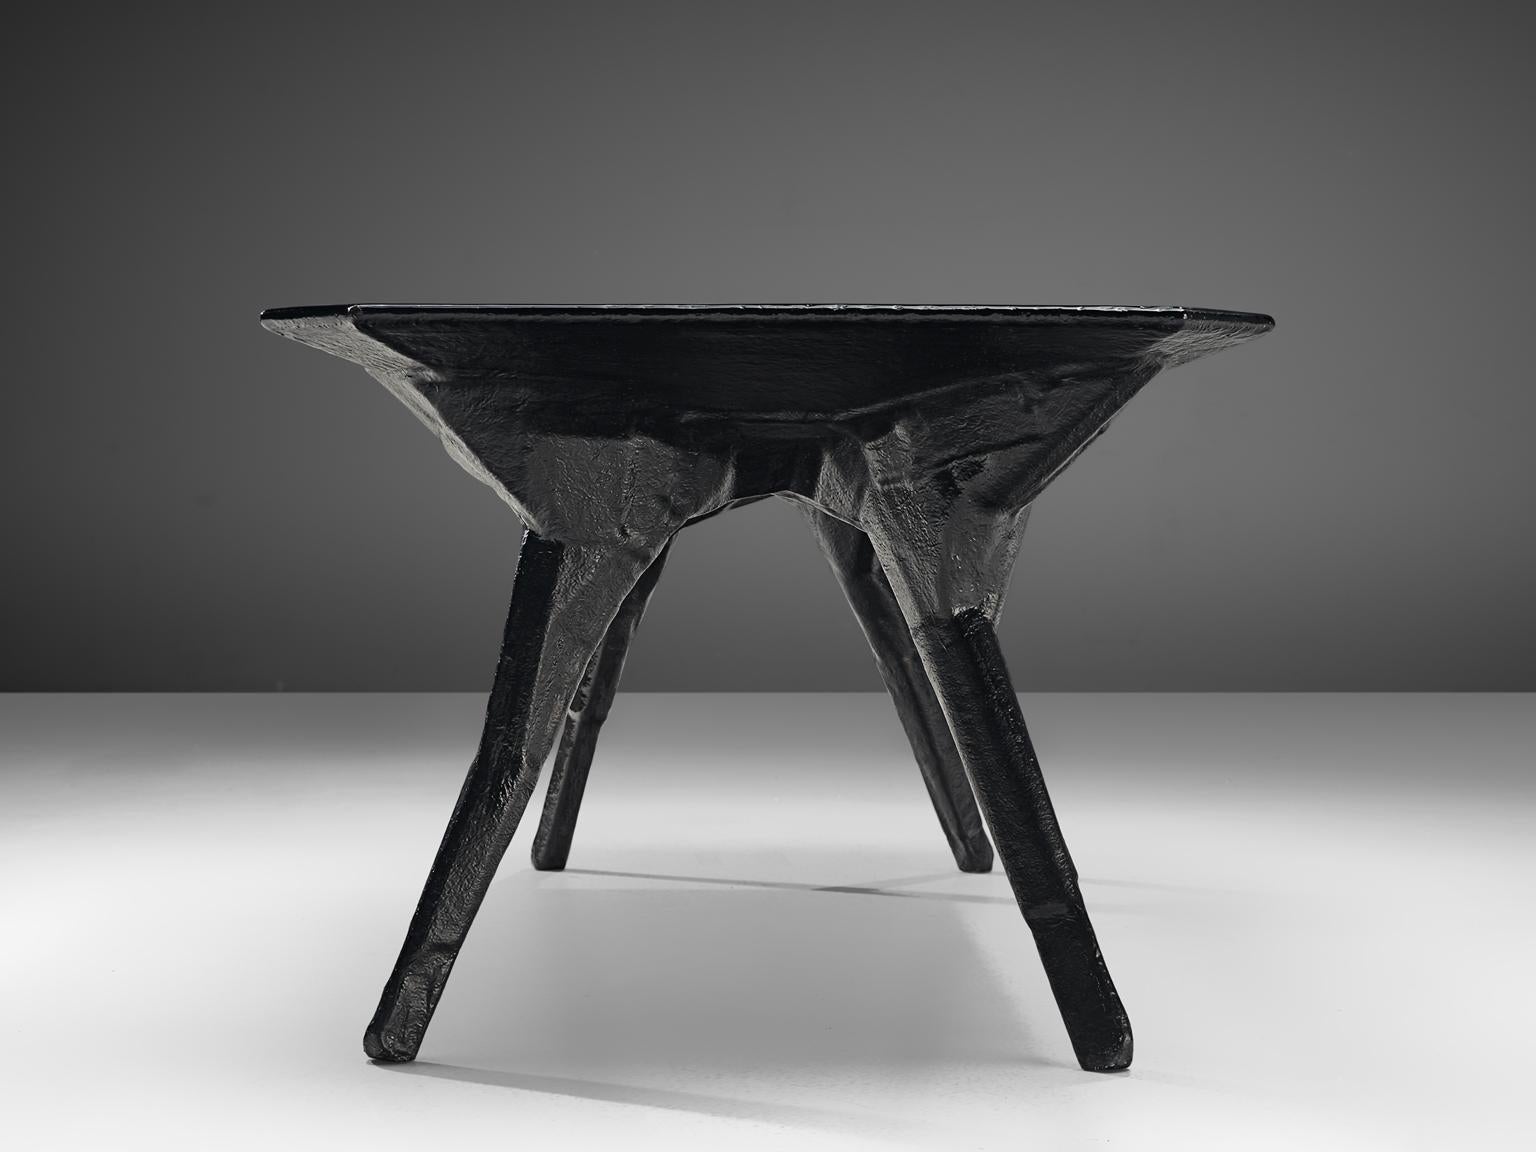 Fiberglass El Ultimo Grito Dining Table with Sculptural Legs